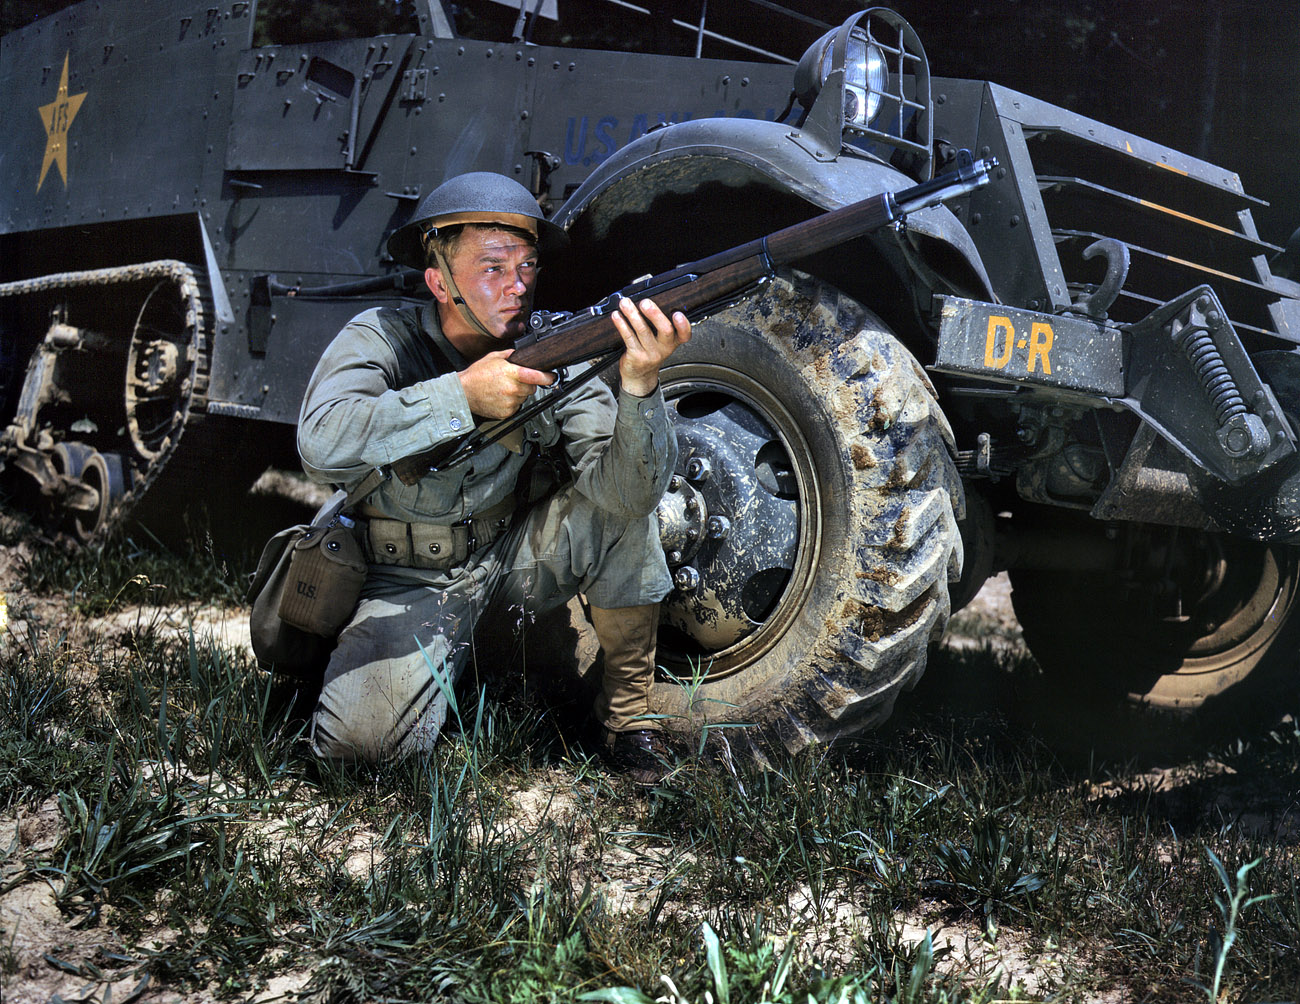 June 1942. Fort Knox, Kentucky. "Infantryman with halftrack. A young soldier sights his Garand rifle like an old-timer. He likes the piece for its fine firing qualities and its rugged, dependable mechanism." 4x5 Kodachrome transparency by Alfred Palmer for the Office of War Information. View full size.